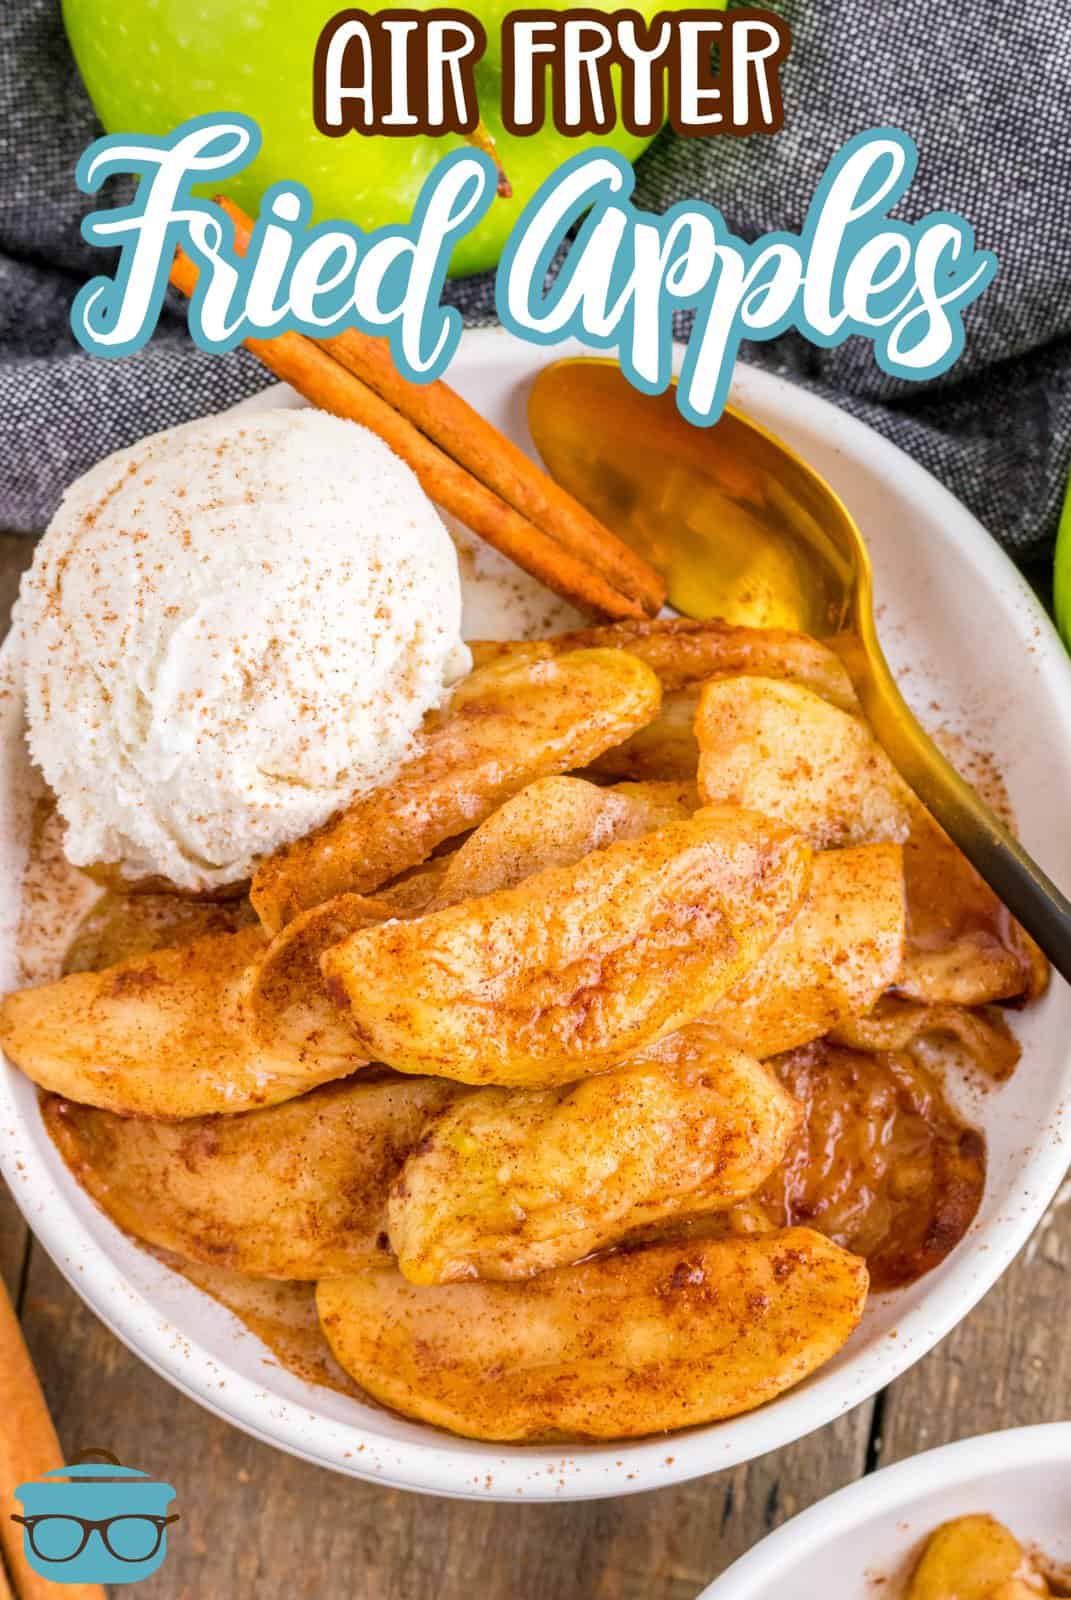 Overhead of Air Fryer Fried Apples in bowl with ice cream, cinnamon stick and spoon, Pinterest image.